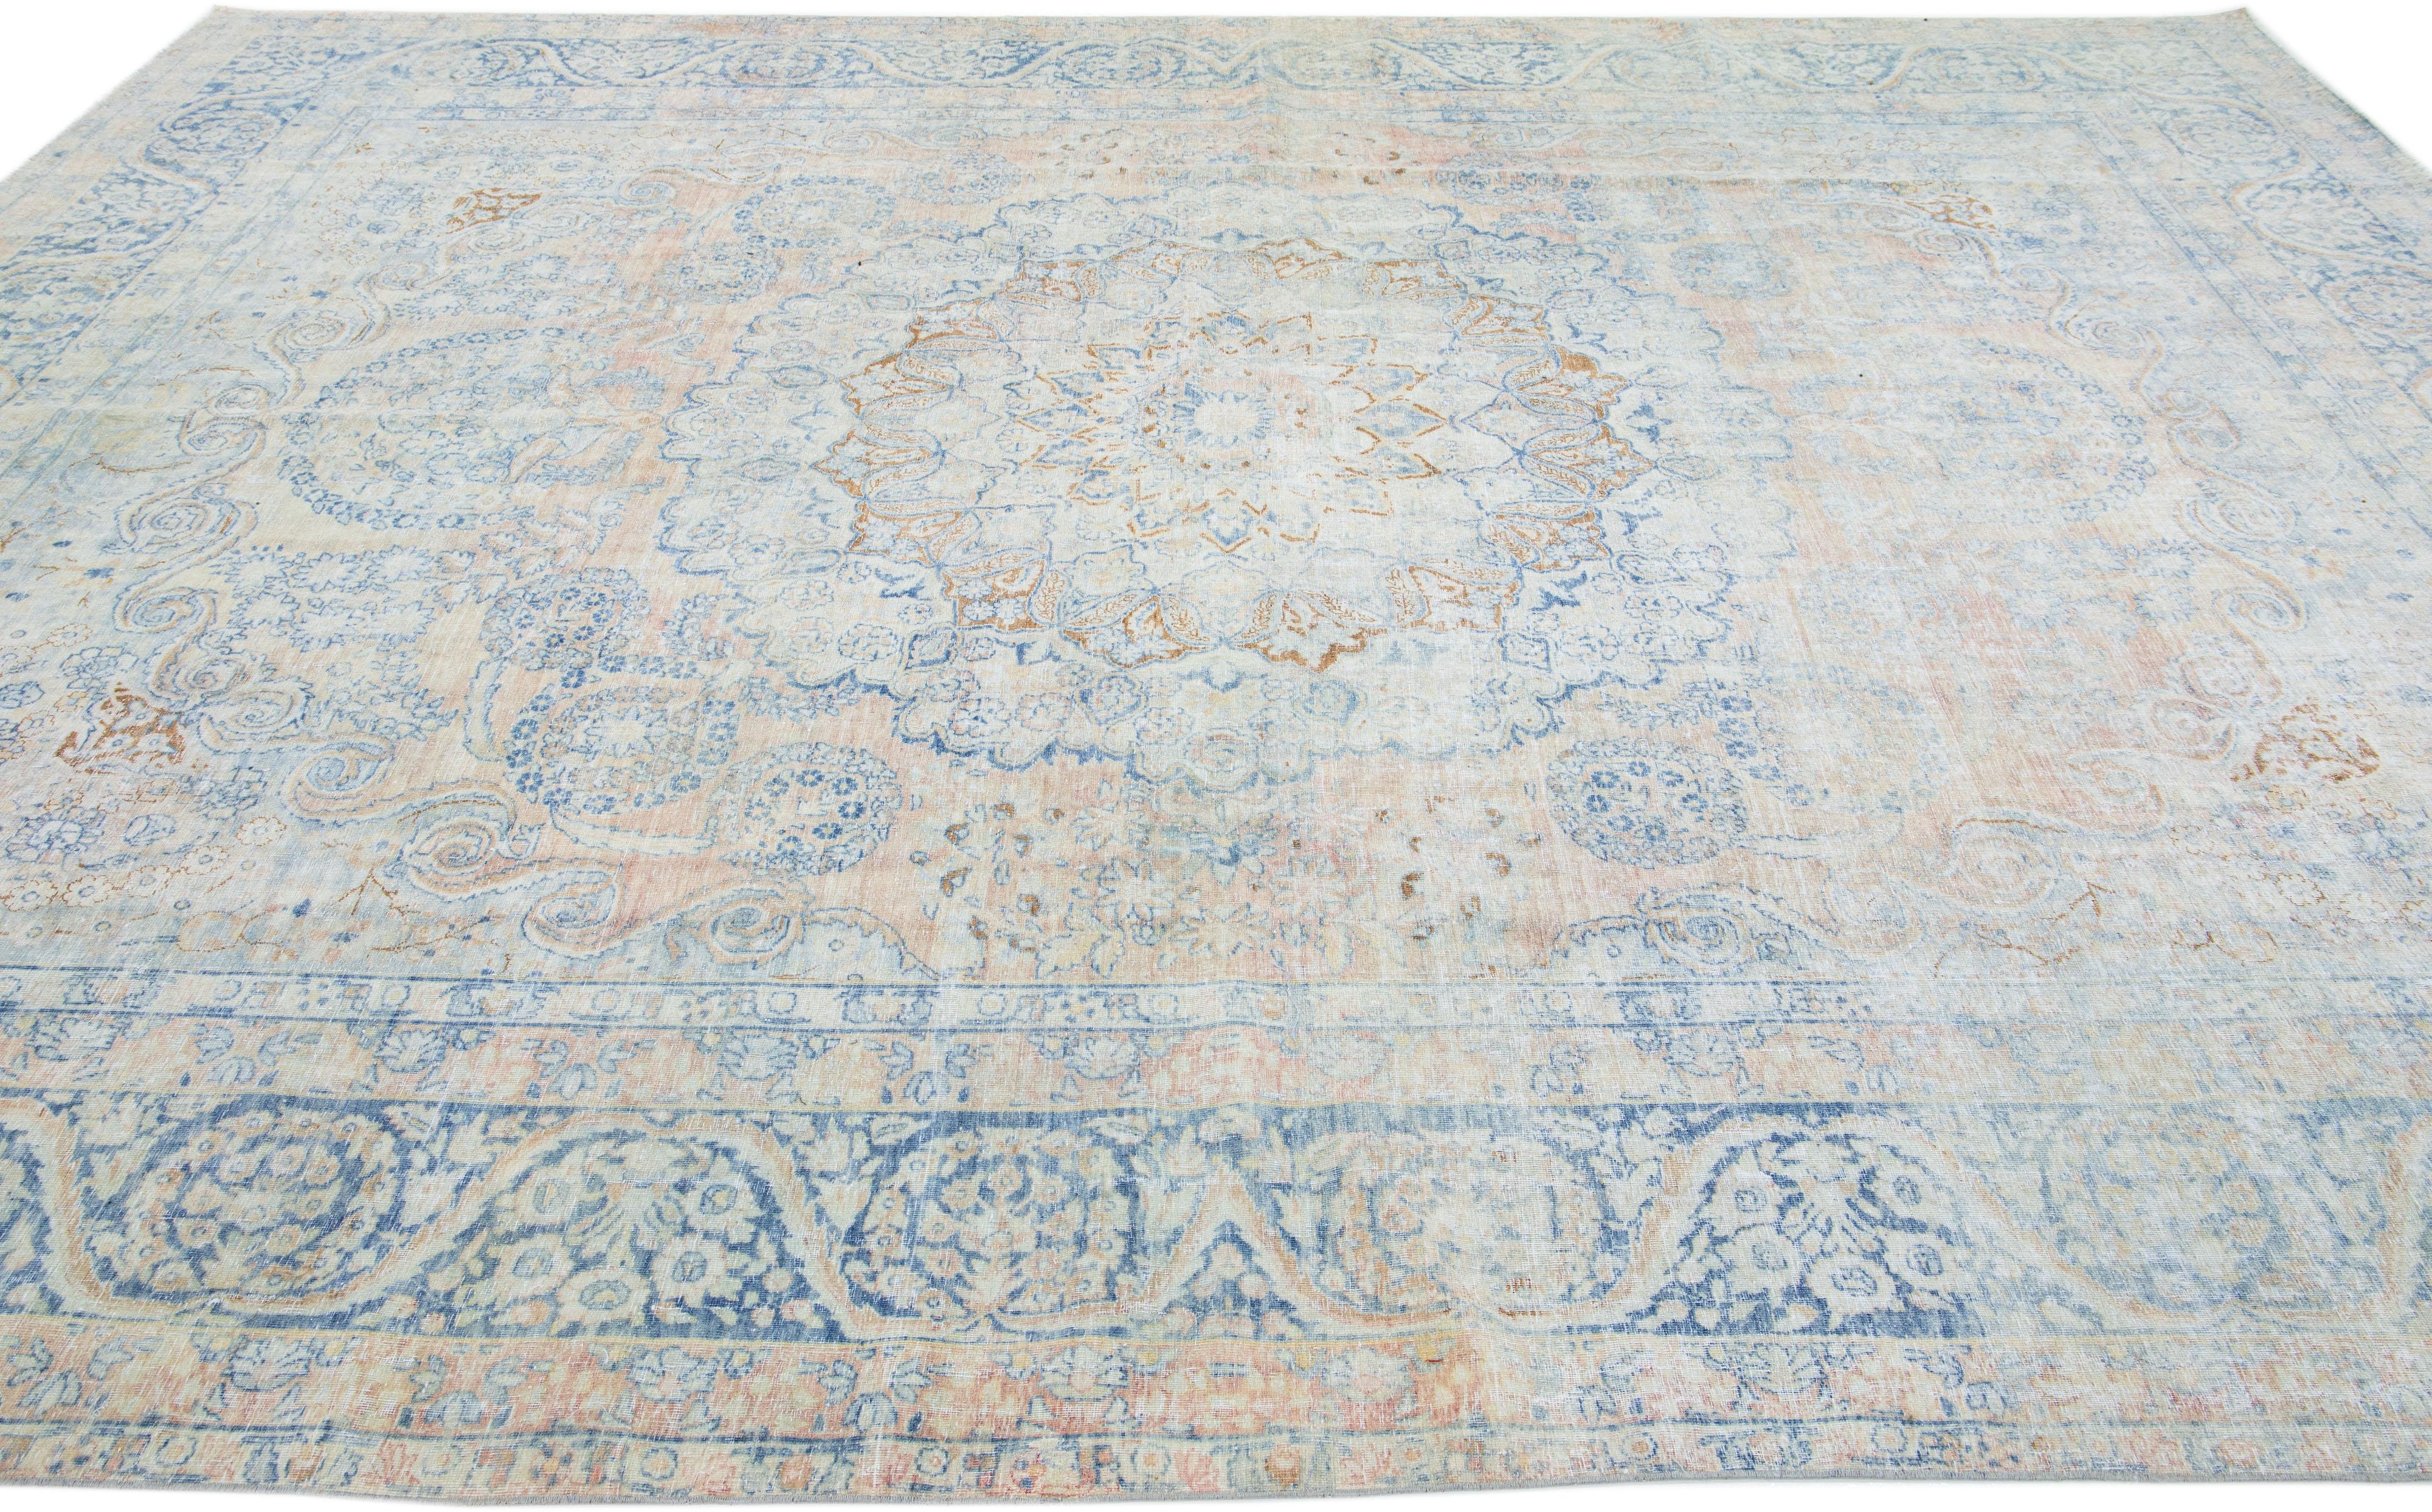 Antique Persian Mahal Handmade Peach Wool Rug with Rosette Design In Good Condition For Sale In Norwalk, CT